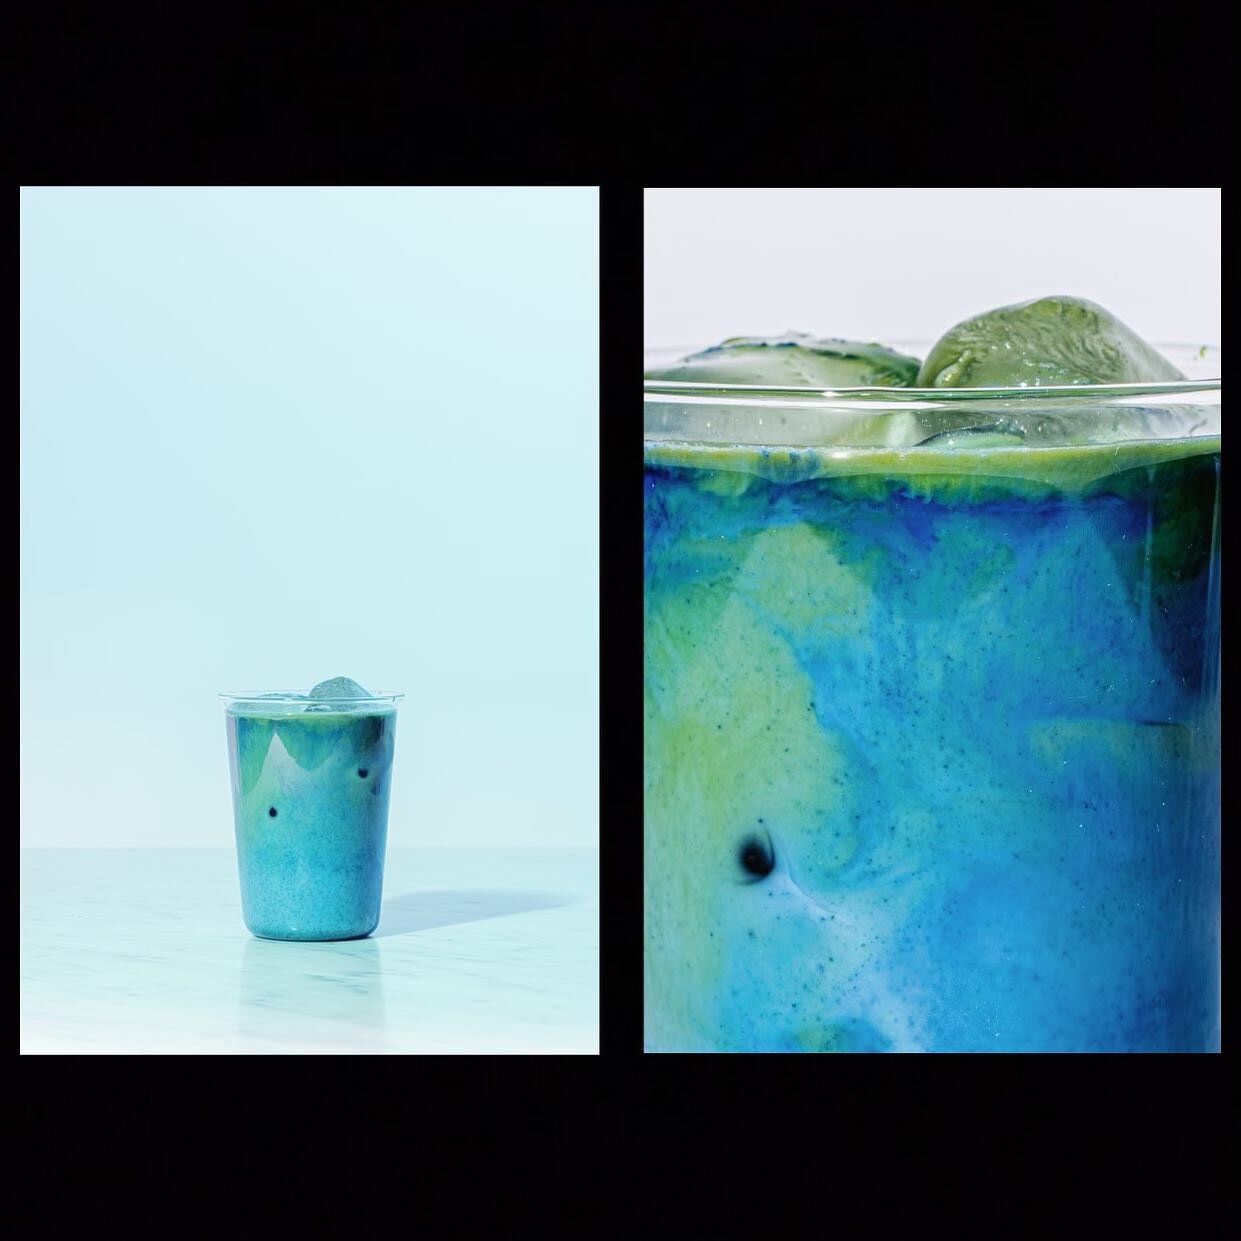 Introducing our earth iced matcha. Blend of green and blue matcha (butterfly pea flower powder) mixed with your choice of milk and honey. It&rsquo;s not just a beautiful drink, it&rsquo;s super tasty, healthy and refreshing!